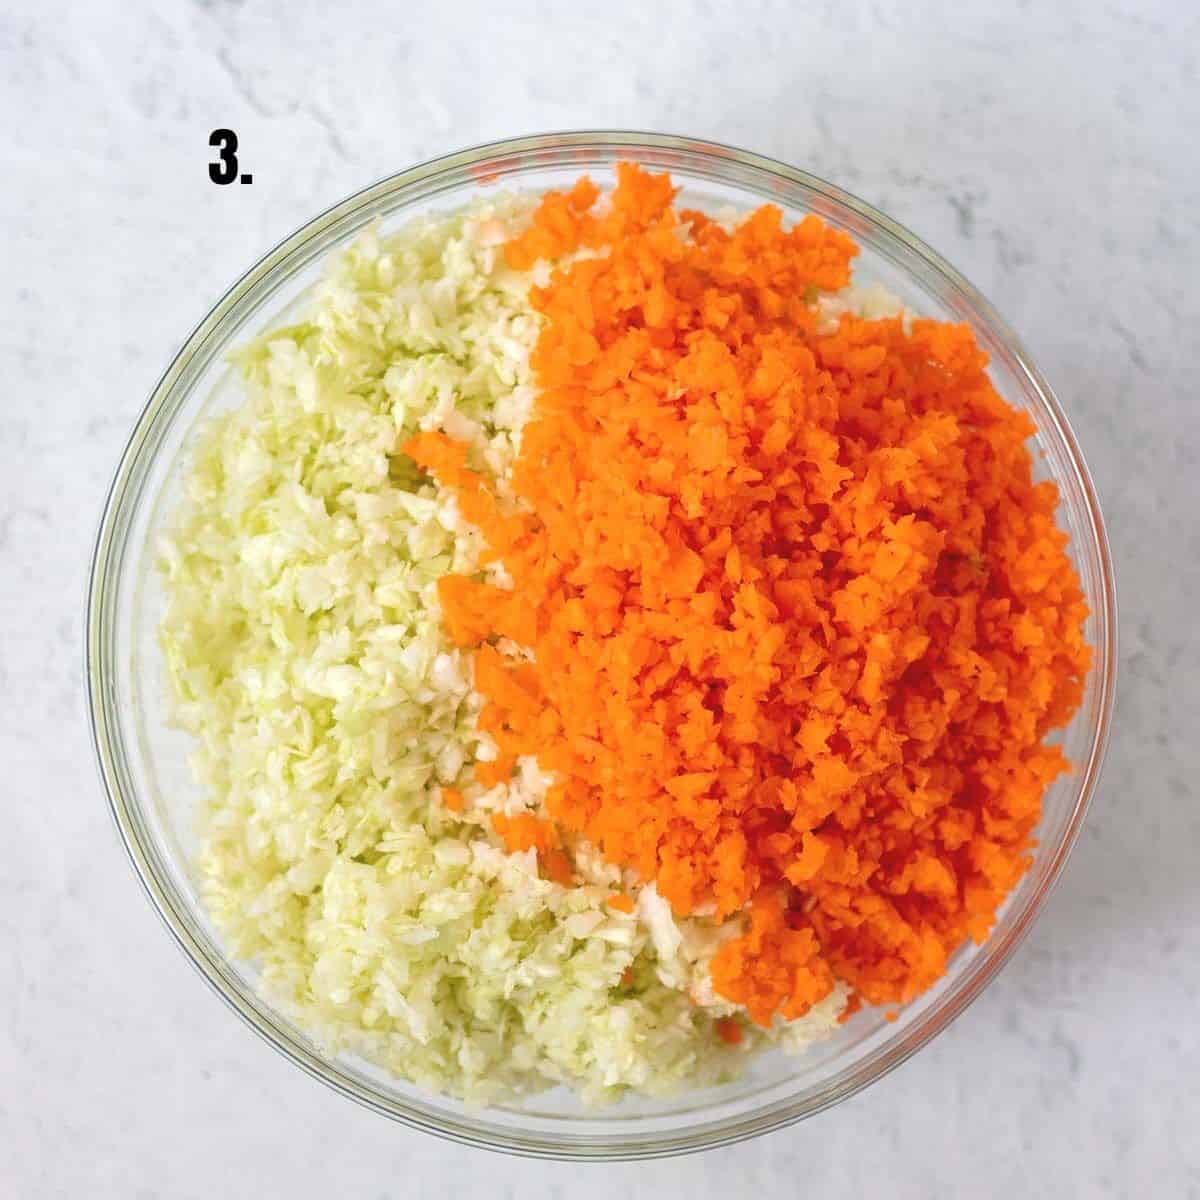 shredded cabbage and carrots in a clear glass mixing bowl